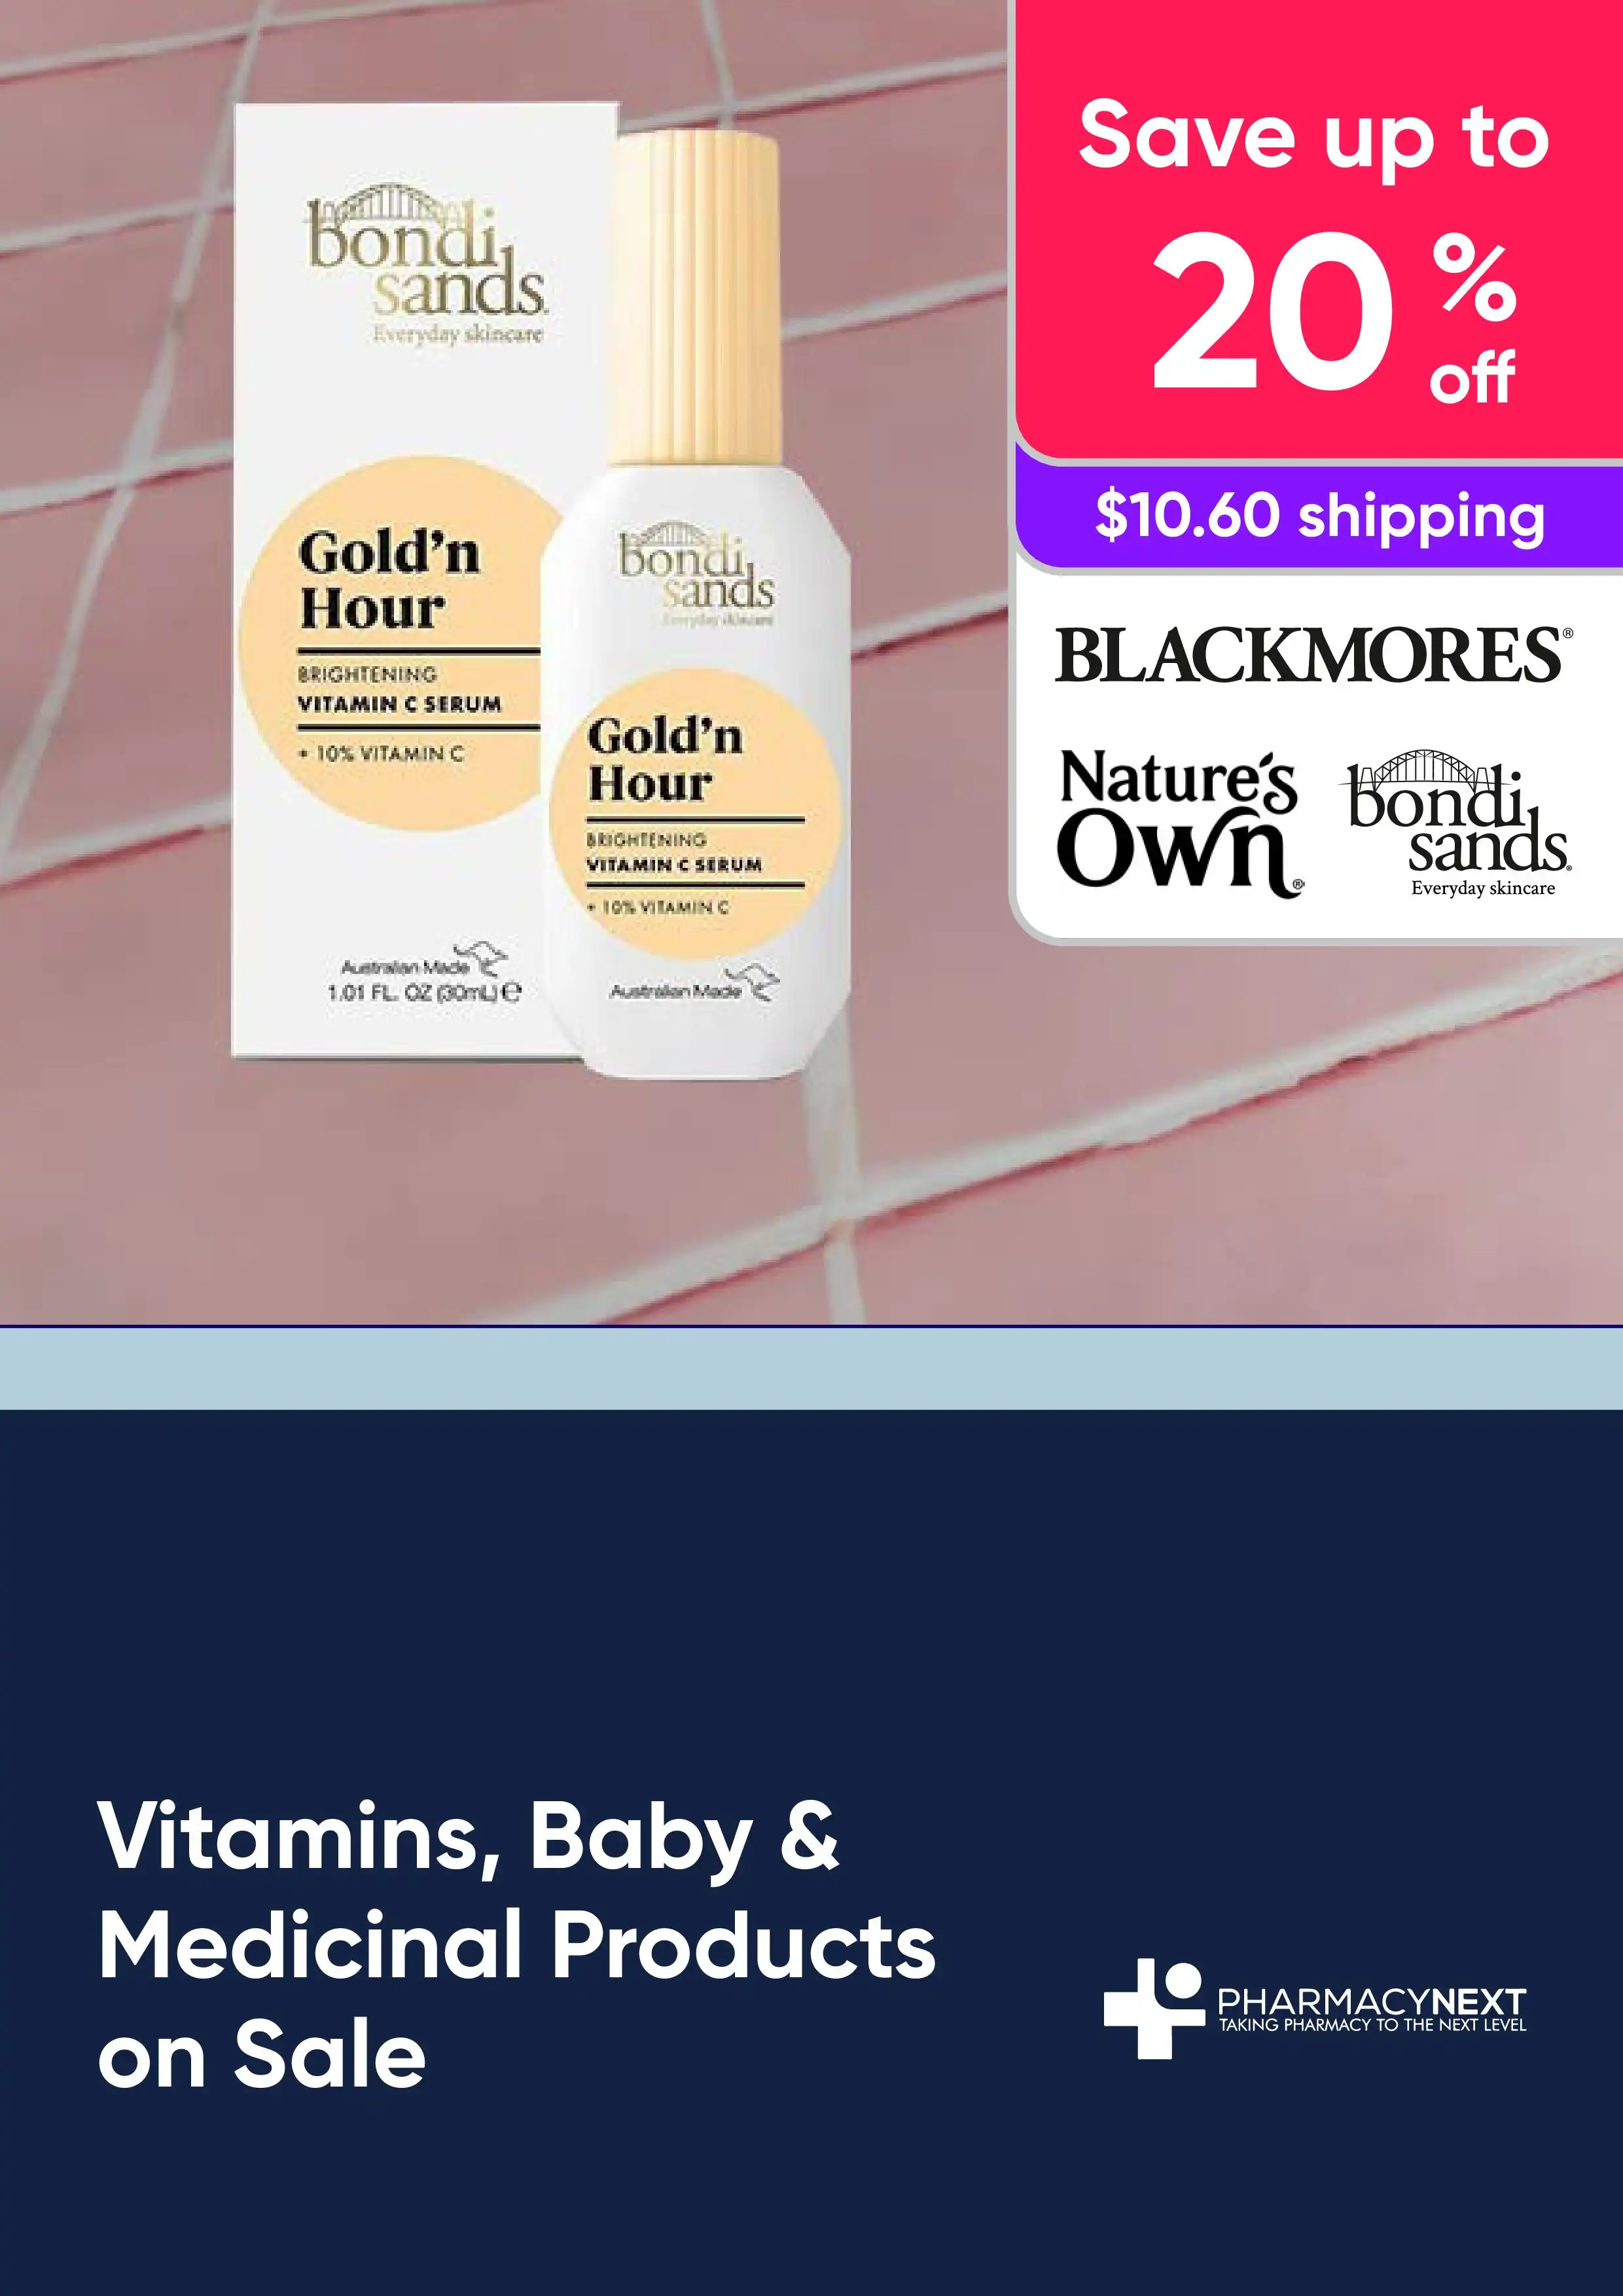 Up to 20% Off Vitamins, Baby & Medicinal Products